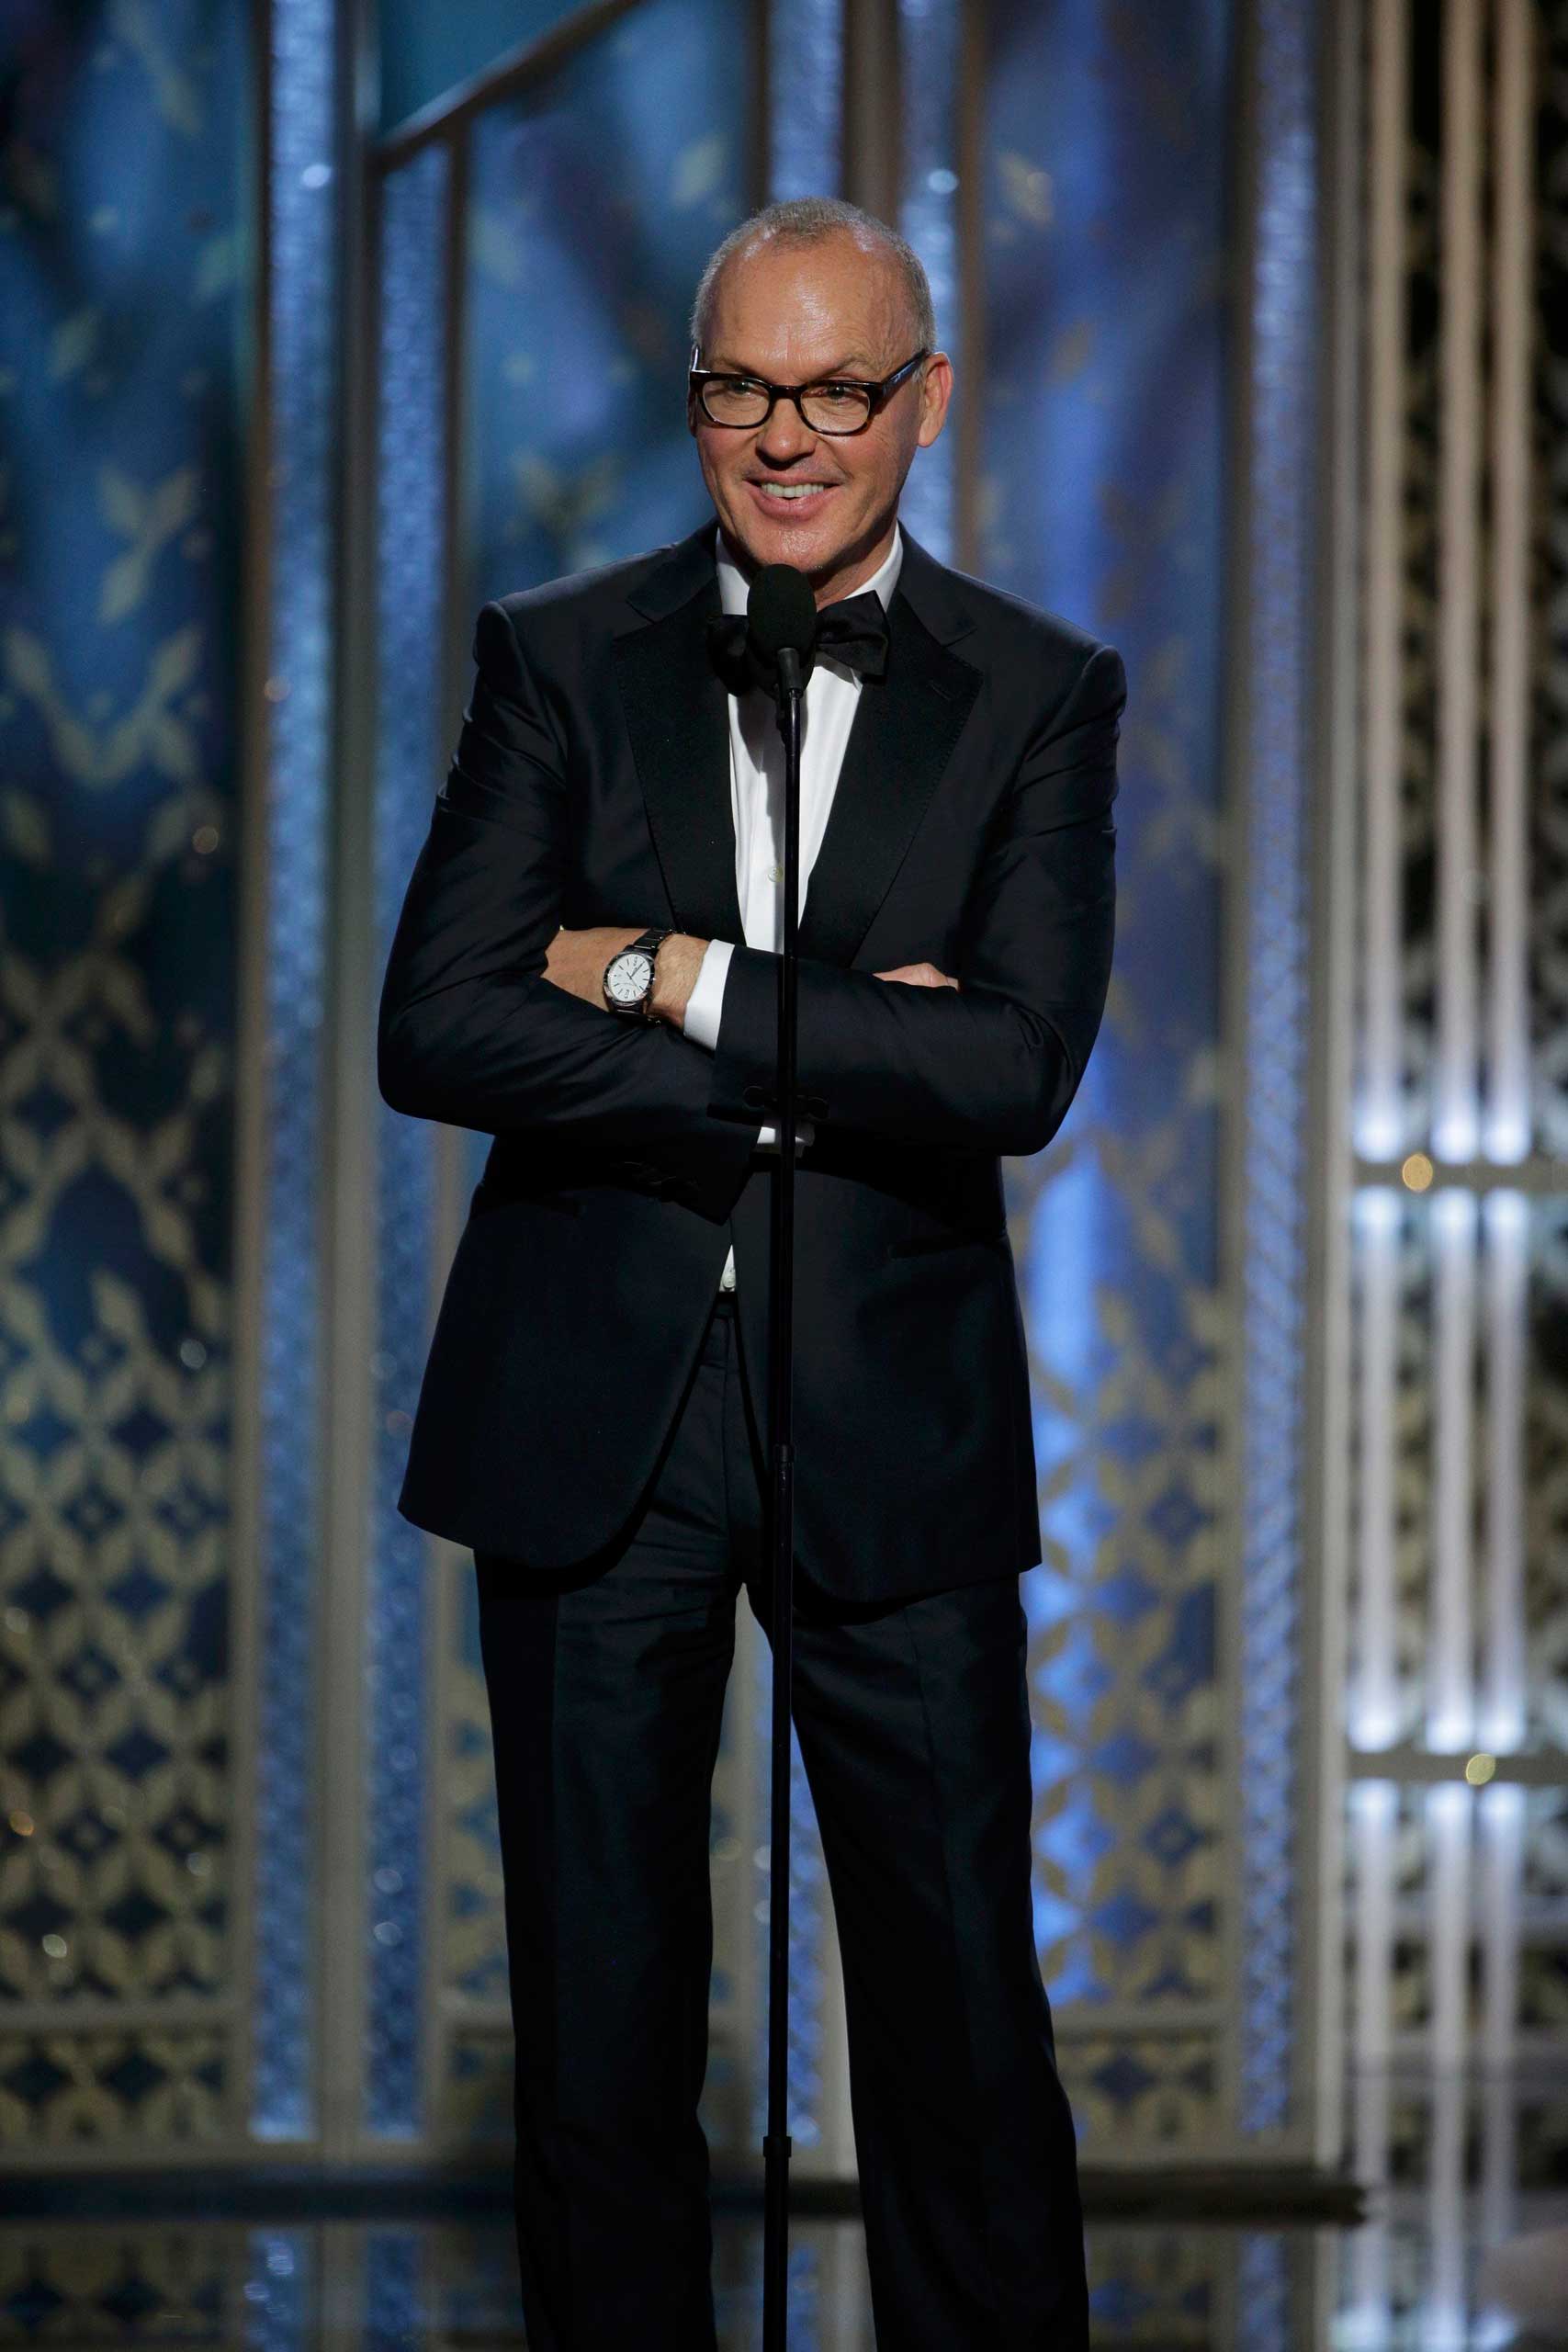 Michael Keaton accepts the Golden Globe Award for Best Actor - Motion Picture, Comedy or Musical for "Birdman" at the 72nd Golden Globe Awards in Beverly Hills,  Jan. 11, 2015. (Paul Drinkwater—Reuters)